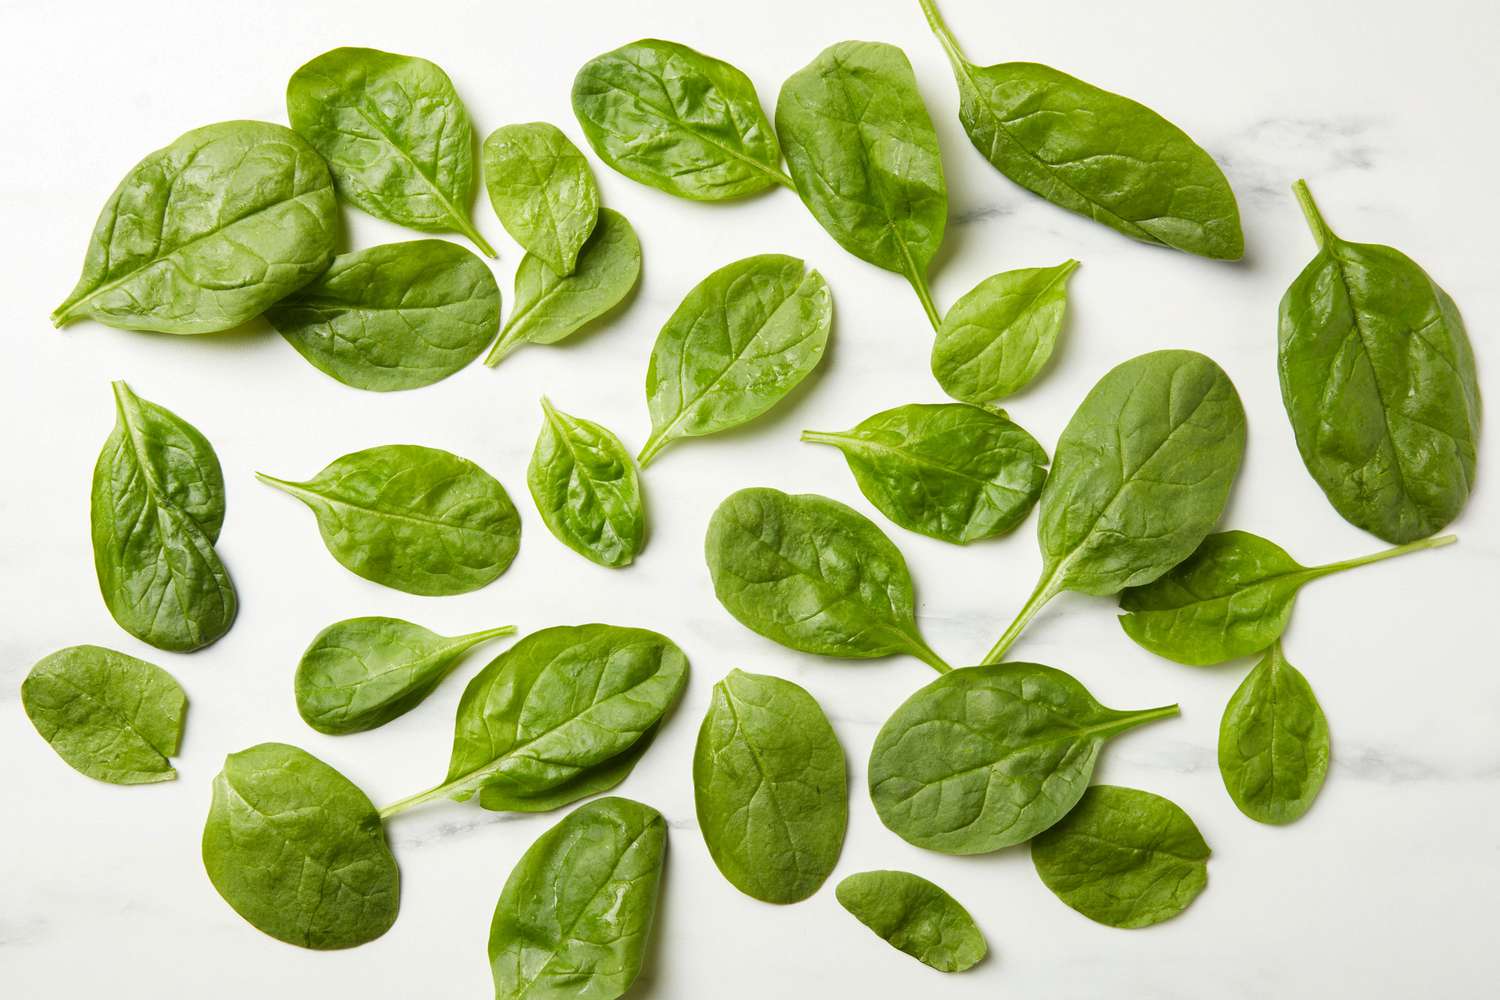 Leaves of baby spinach scattered on a marble surface